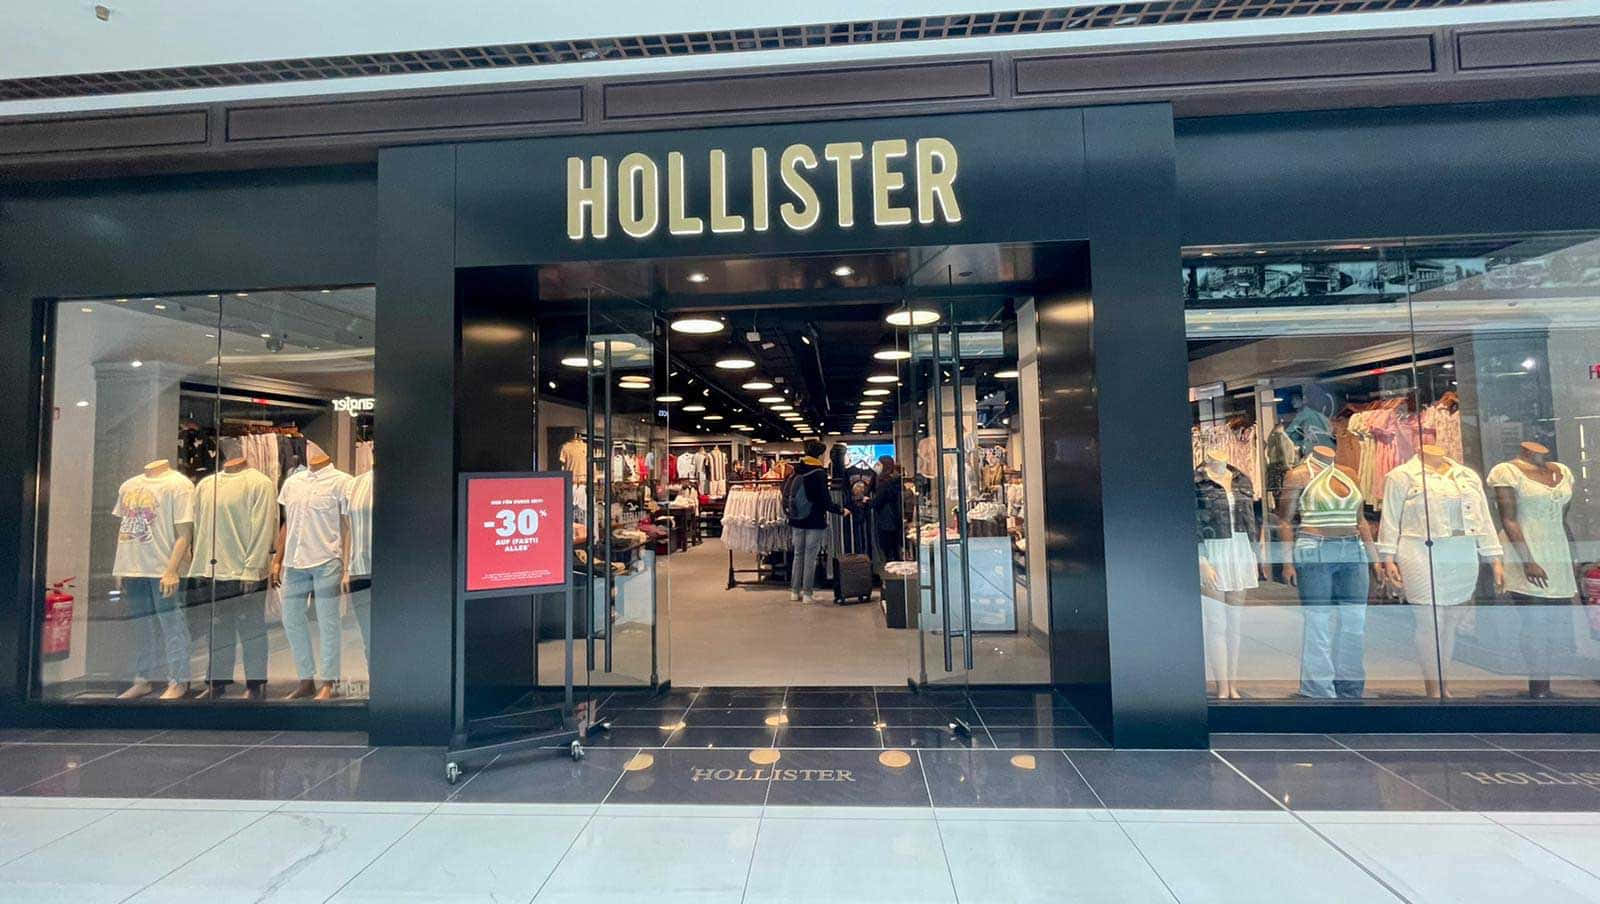 Hollister Store In A Mall With A Sign